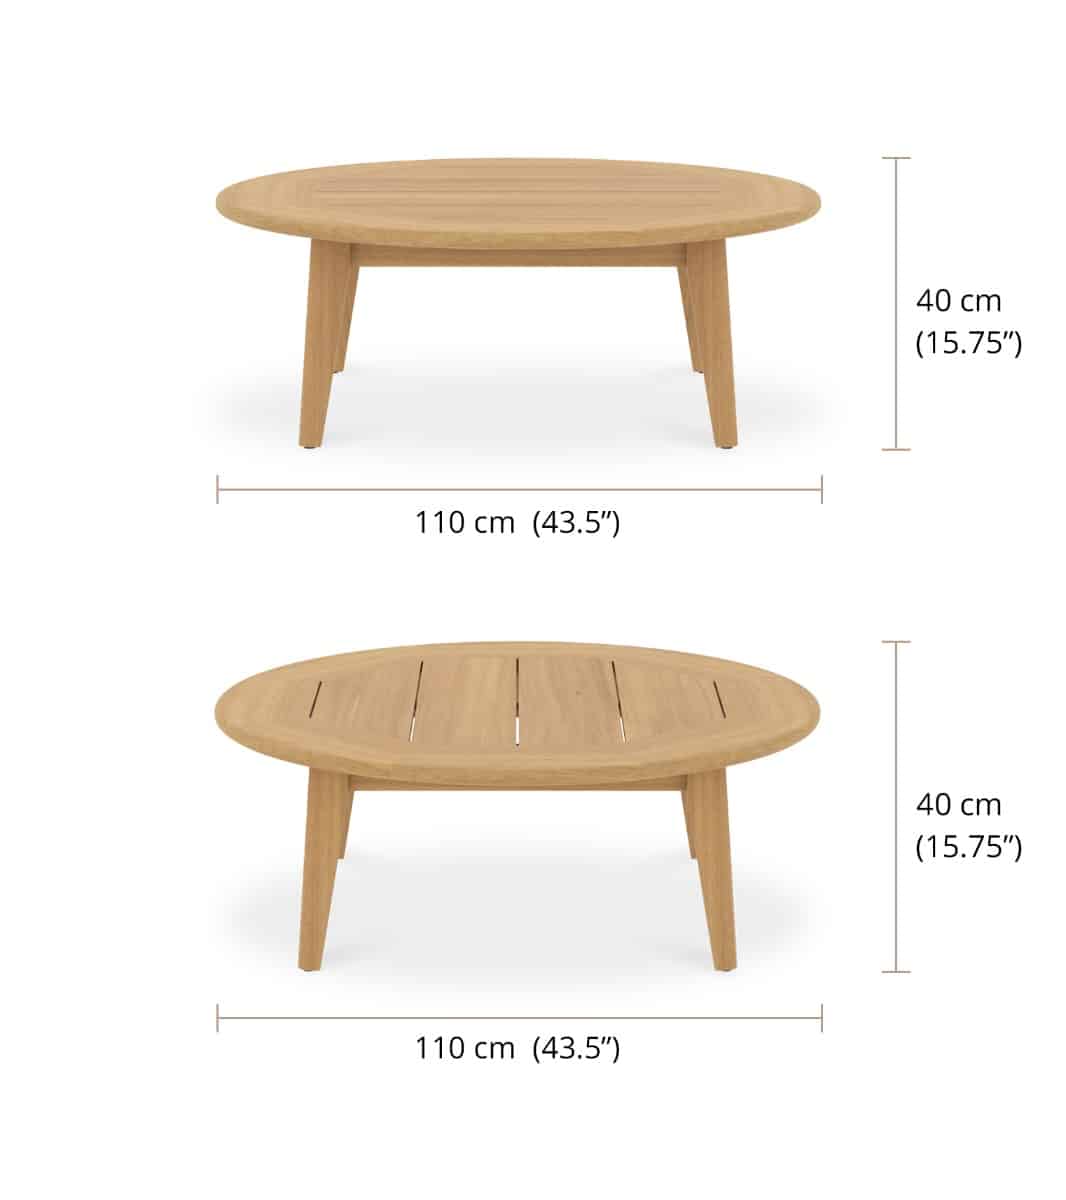 Coffee Table Dimensions Standard / Coffee Table Dimensions And ...